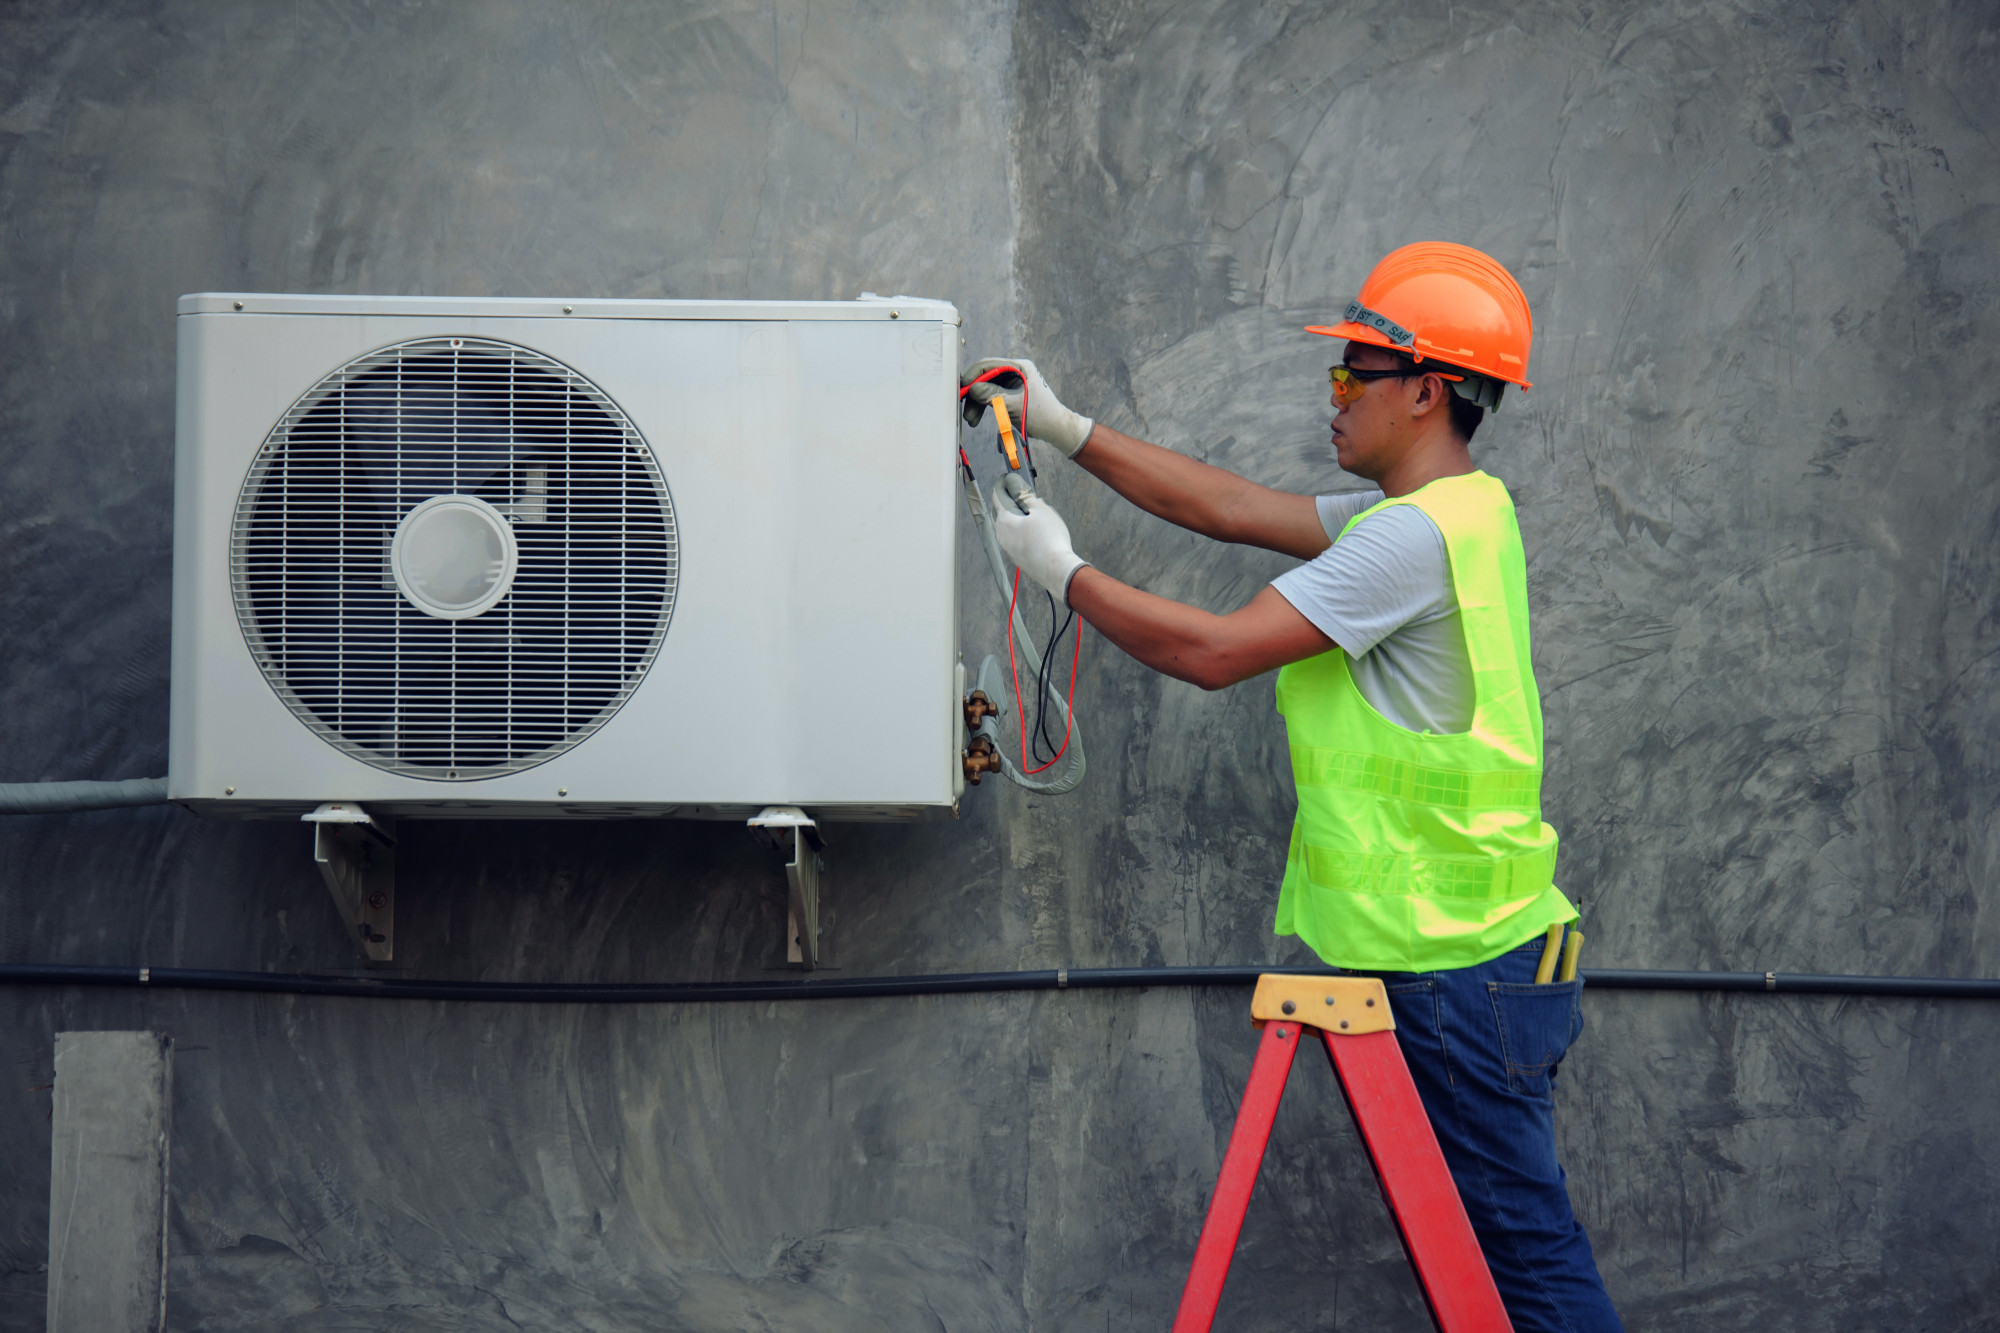 A well-functioning heater and AC maintains temperature and indoor air quality. Learn how to properly choose and care for HVAC systems for homes.